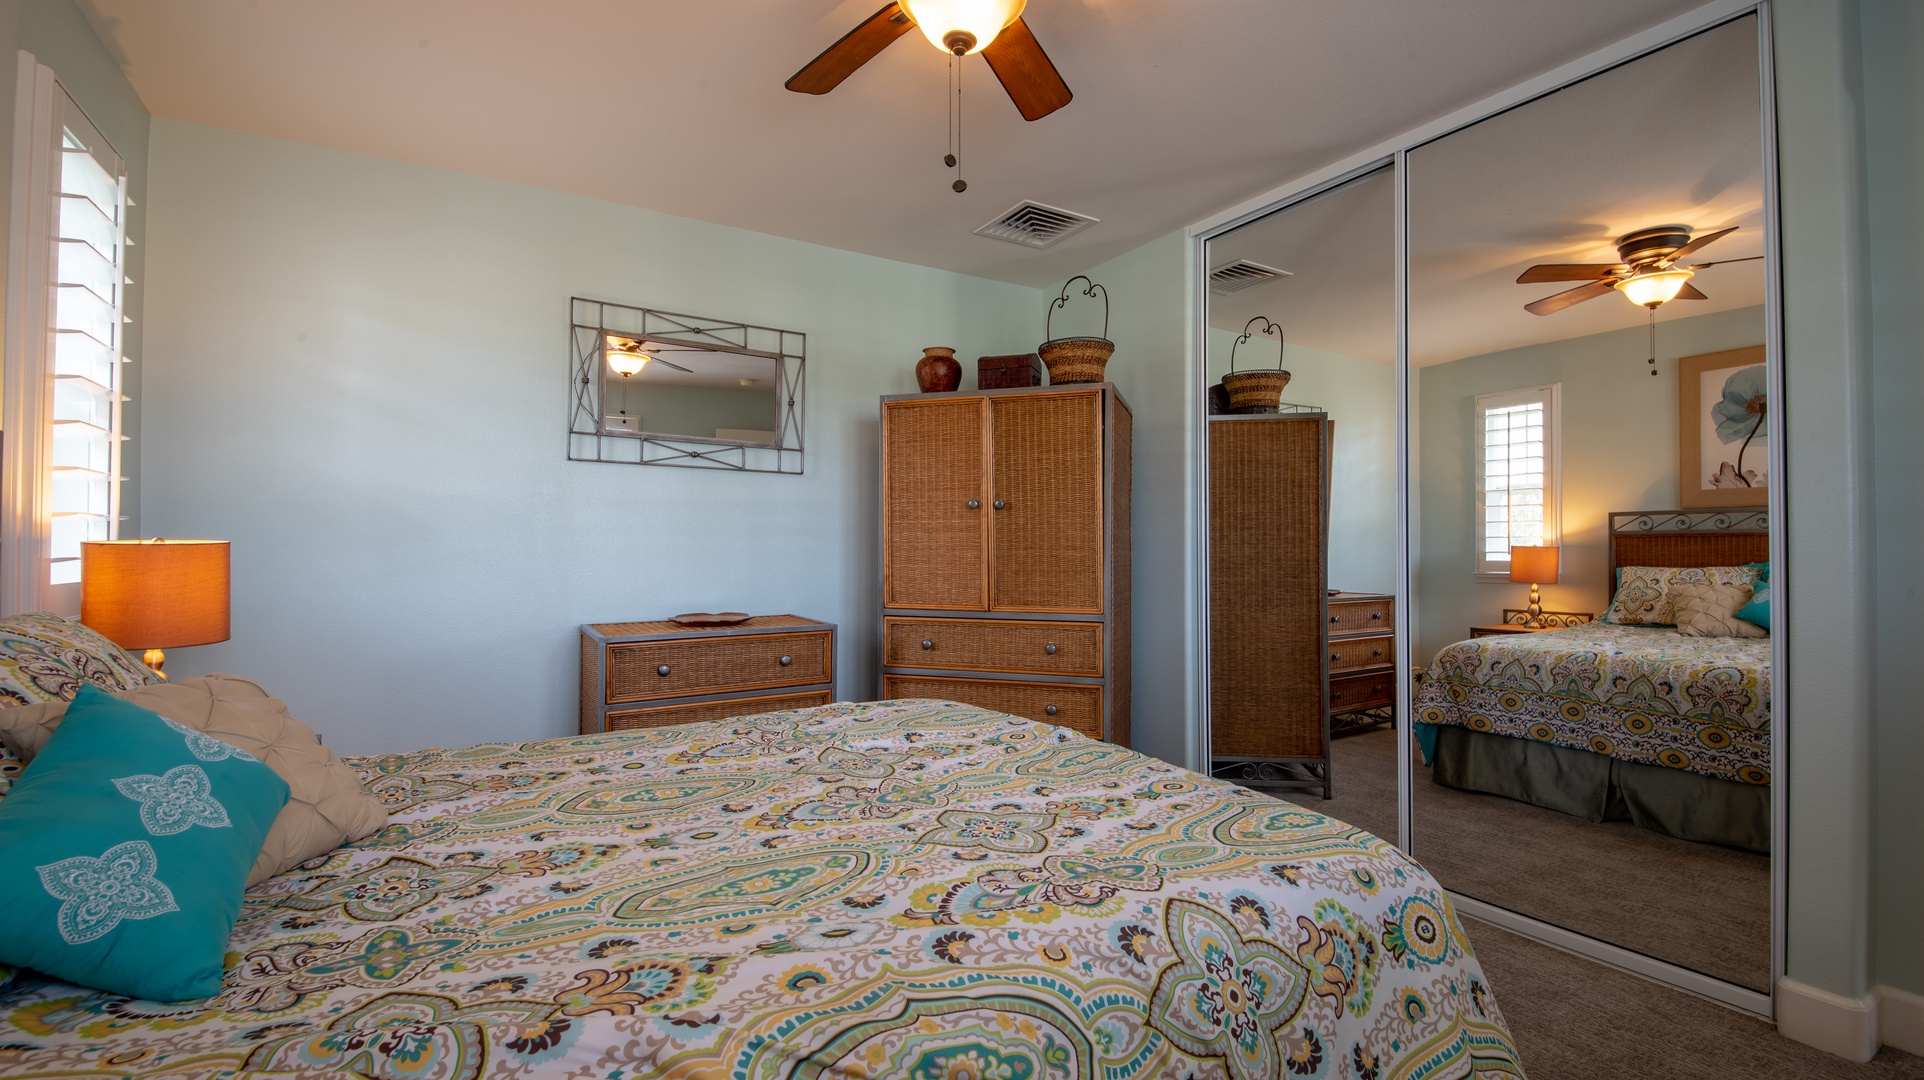 Kapolei Vacation Rentals, Ko Olina Kai 1047B - The second guest bedroom features a dresser and large mirror.